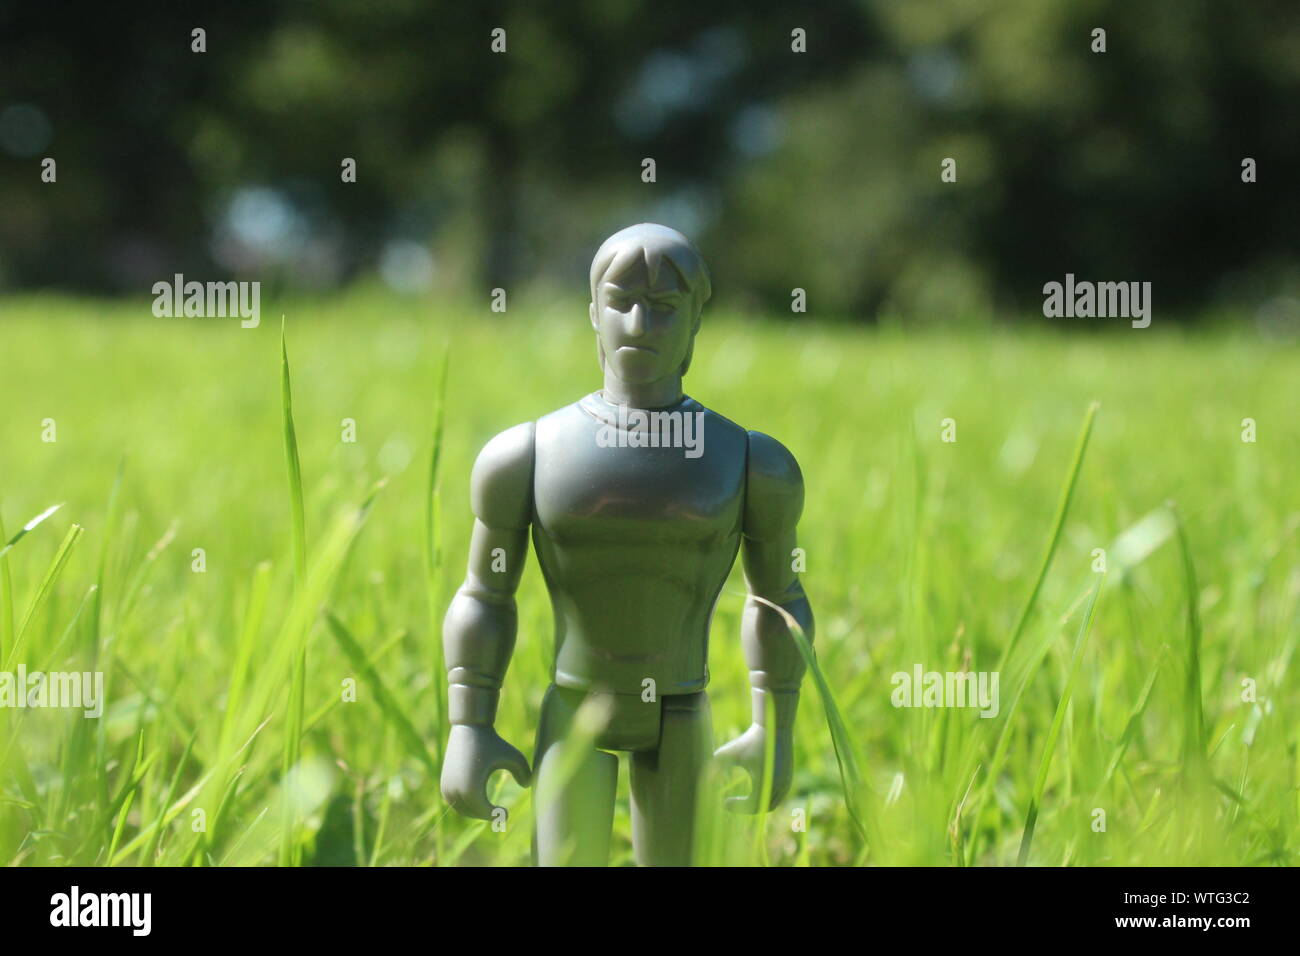 Close up action figure standing in bright grass on a sunny day Stock Photo